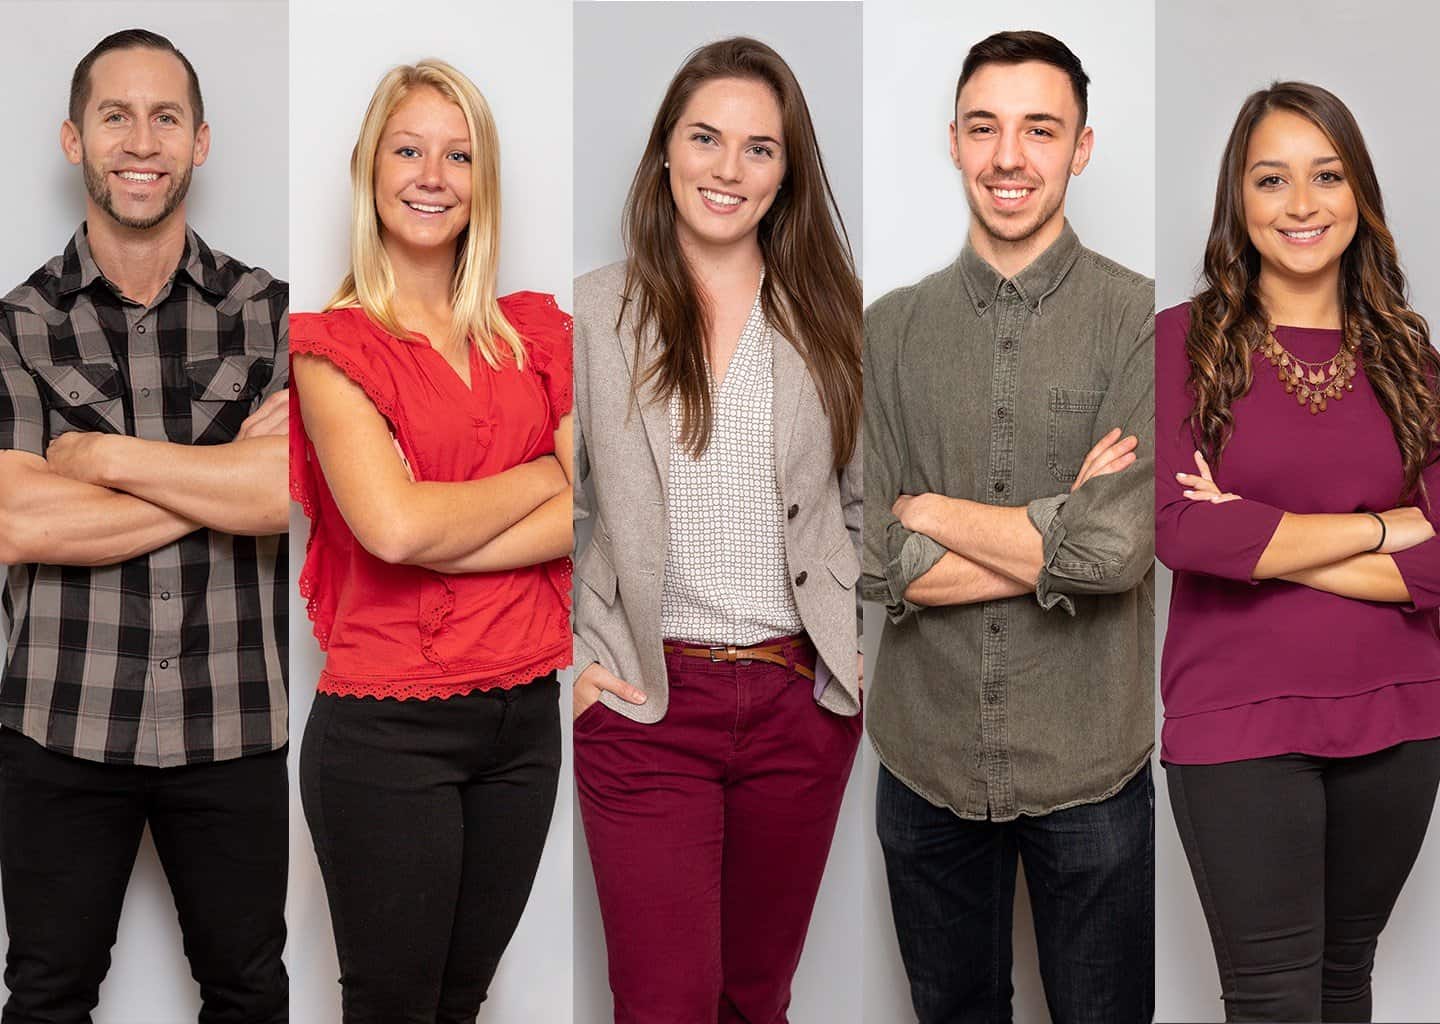 Say Hello to Our Newest Hires! (Can We Get a Welcome High Five?)